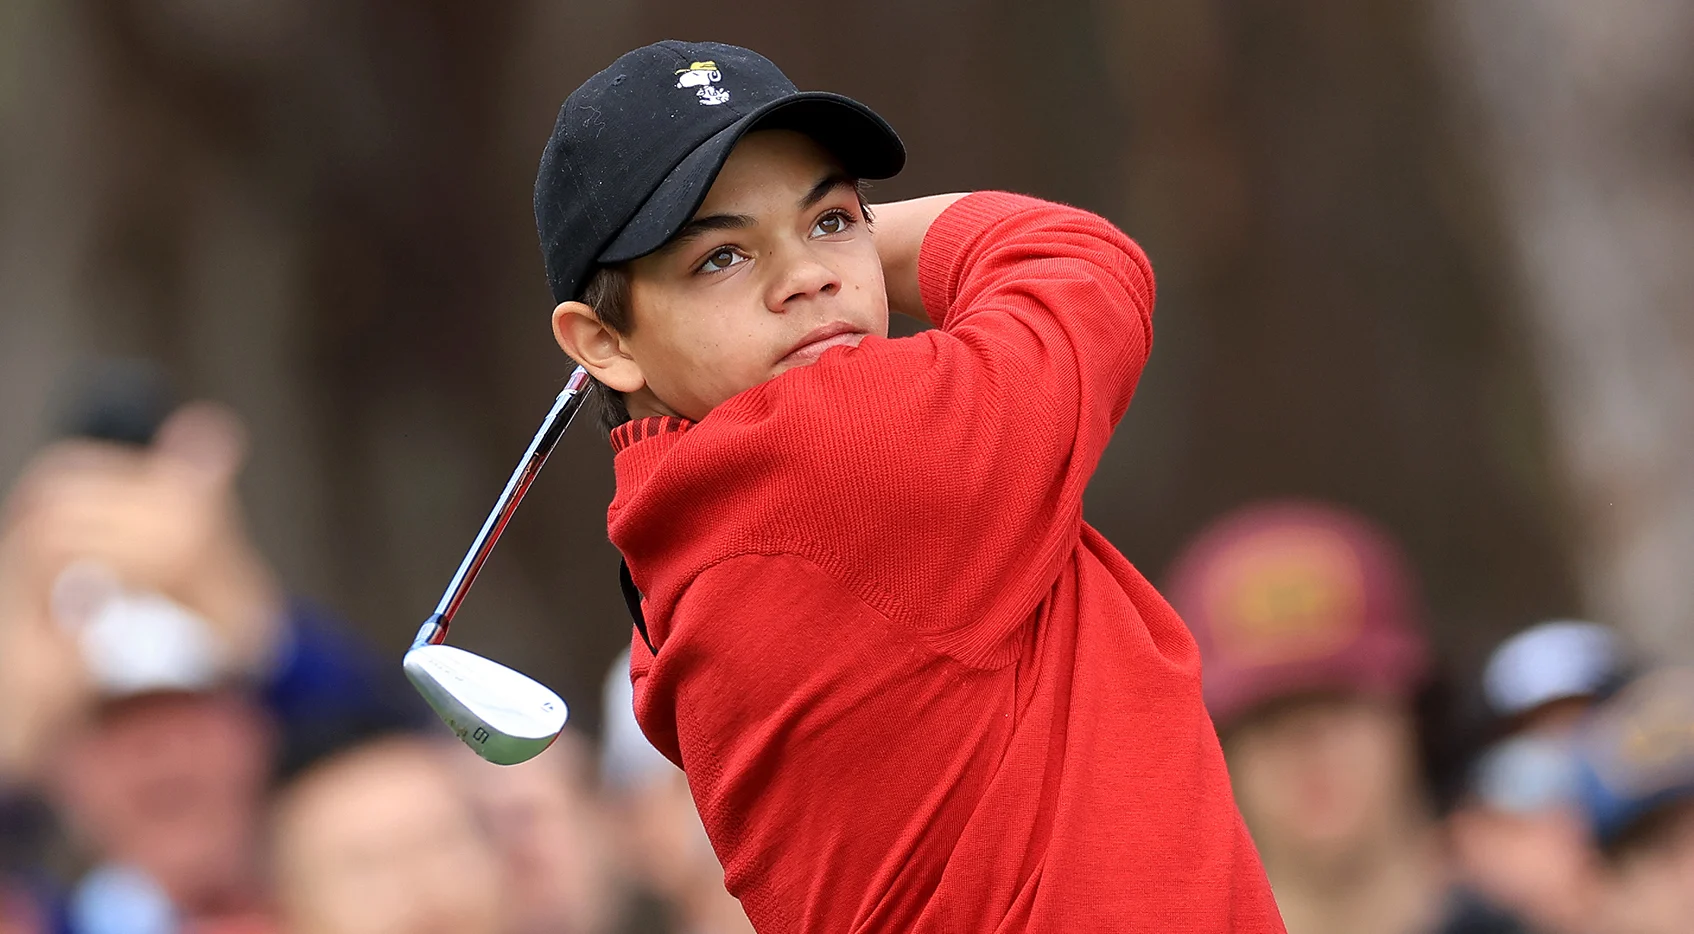 Tiger Woods’ Son, Charlie, Secures Victory In High School Golf Championship